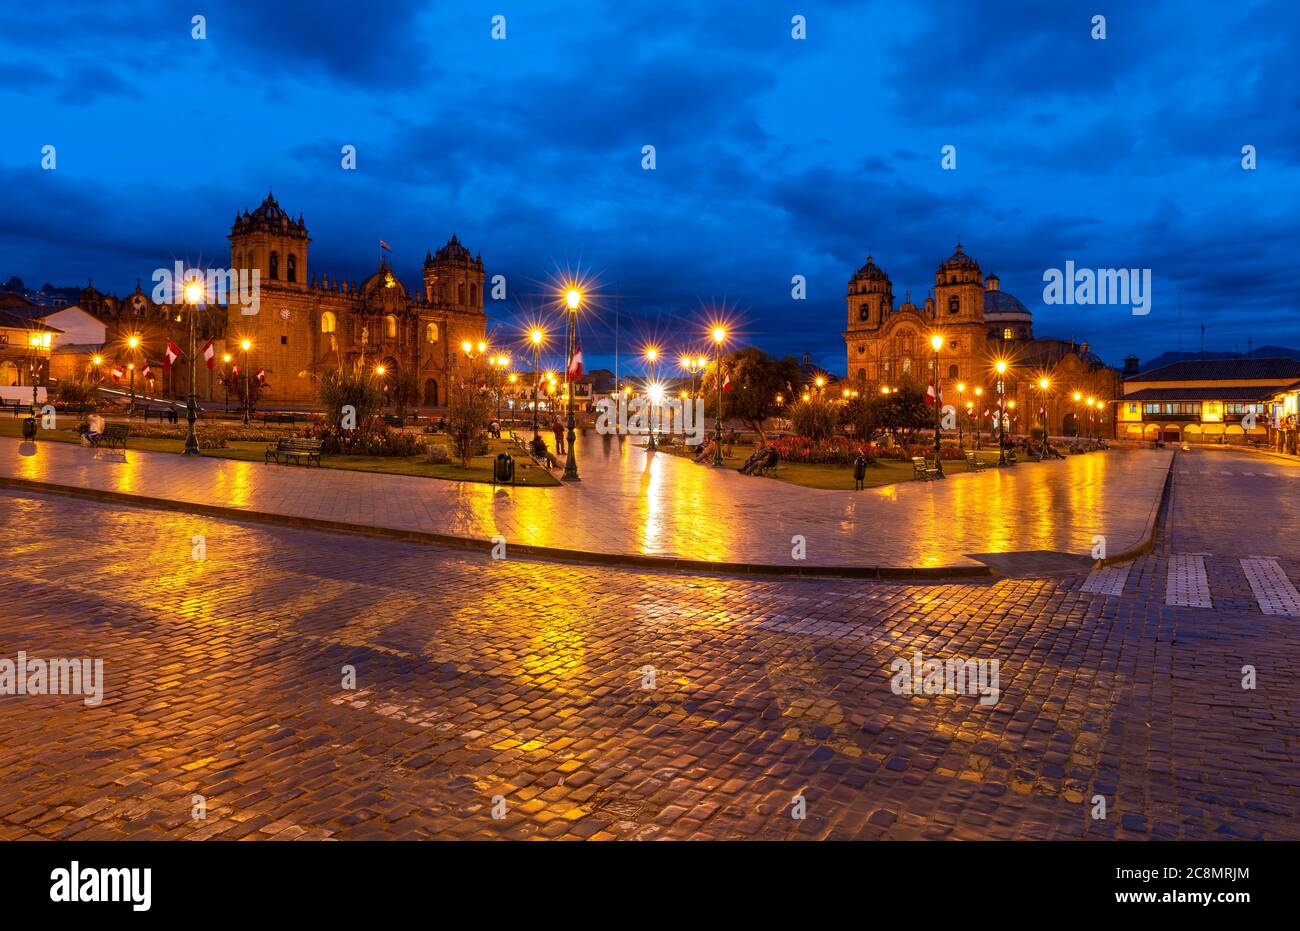 The Plaza de Armas main square of the inca capital Cusco during the blue hour with the Cathedral and Compania de Jesus church, Peru. Stock Photo